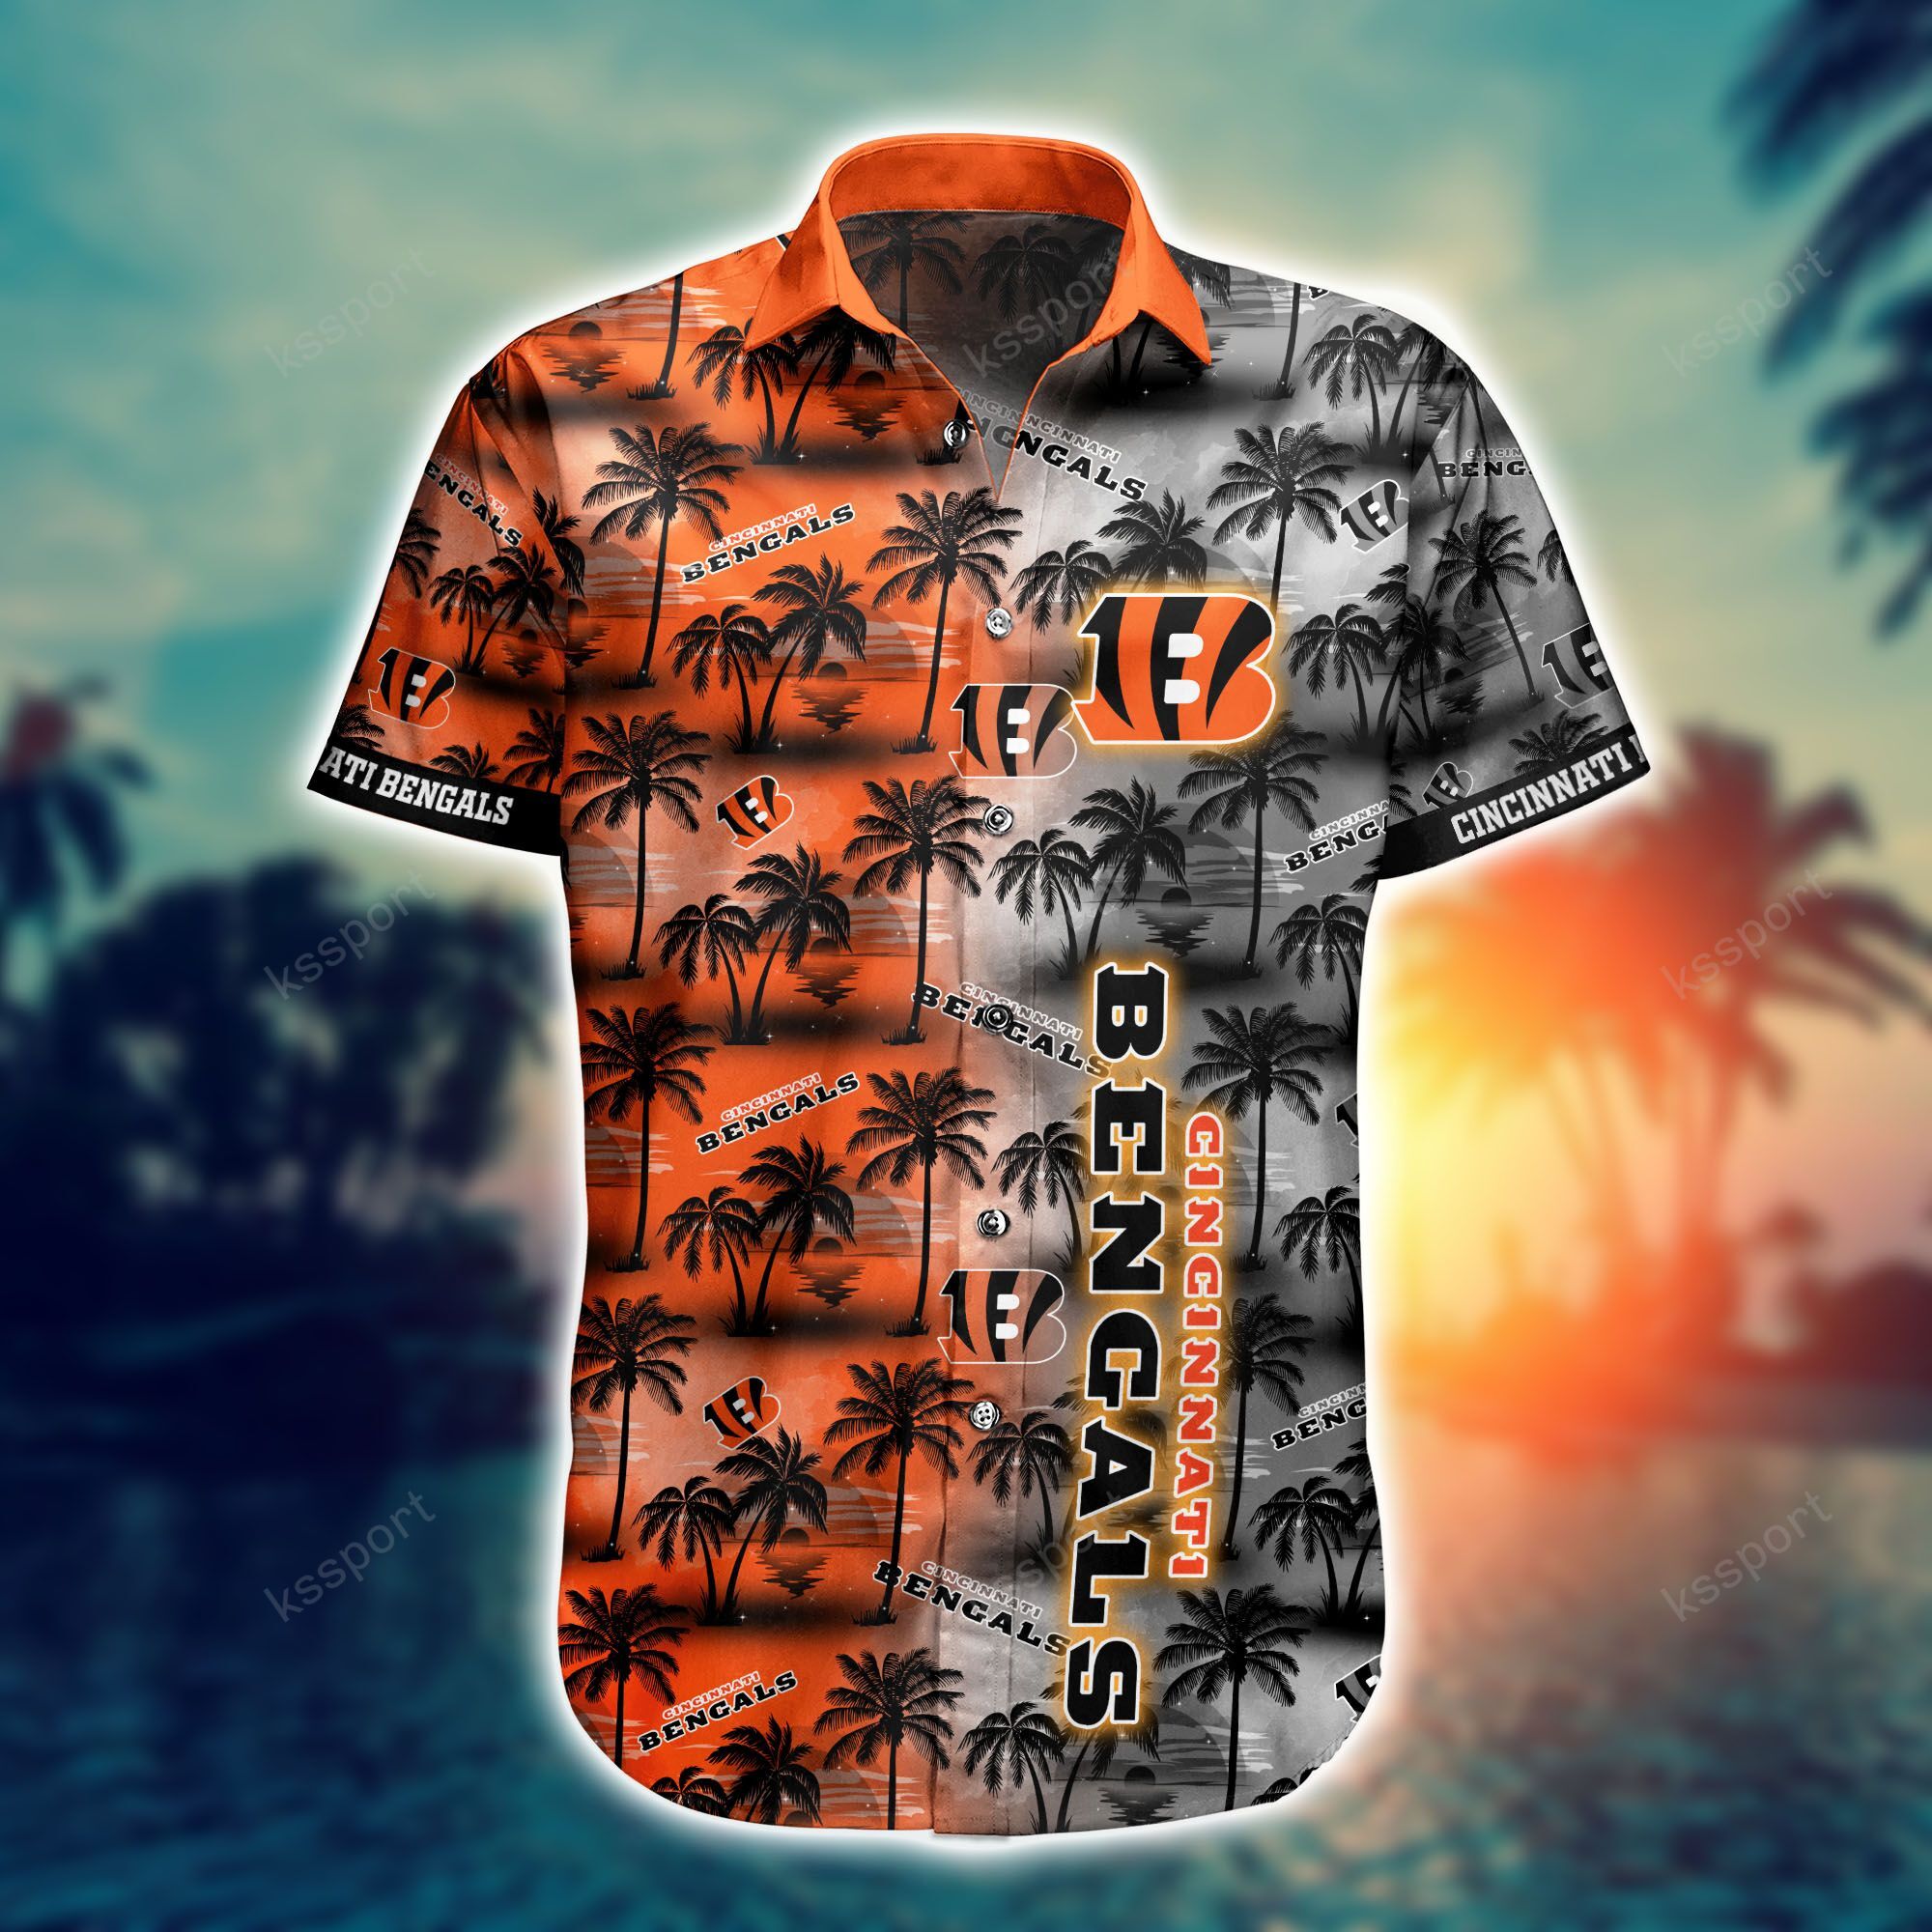 Top cool Hawaiian shirt 2022 - Make sure you get yours today before they run out! 215